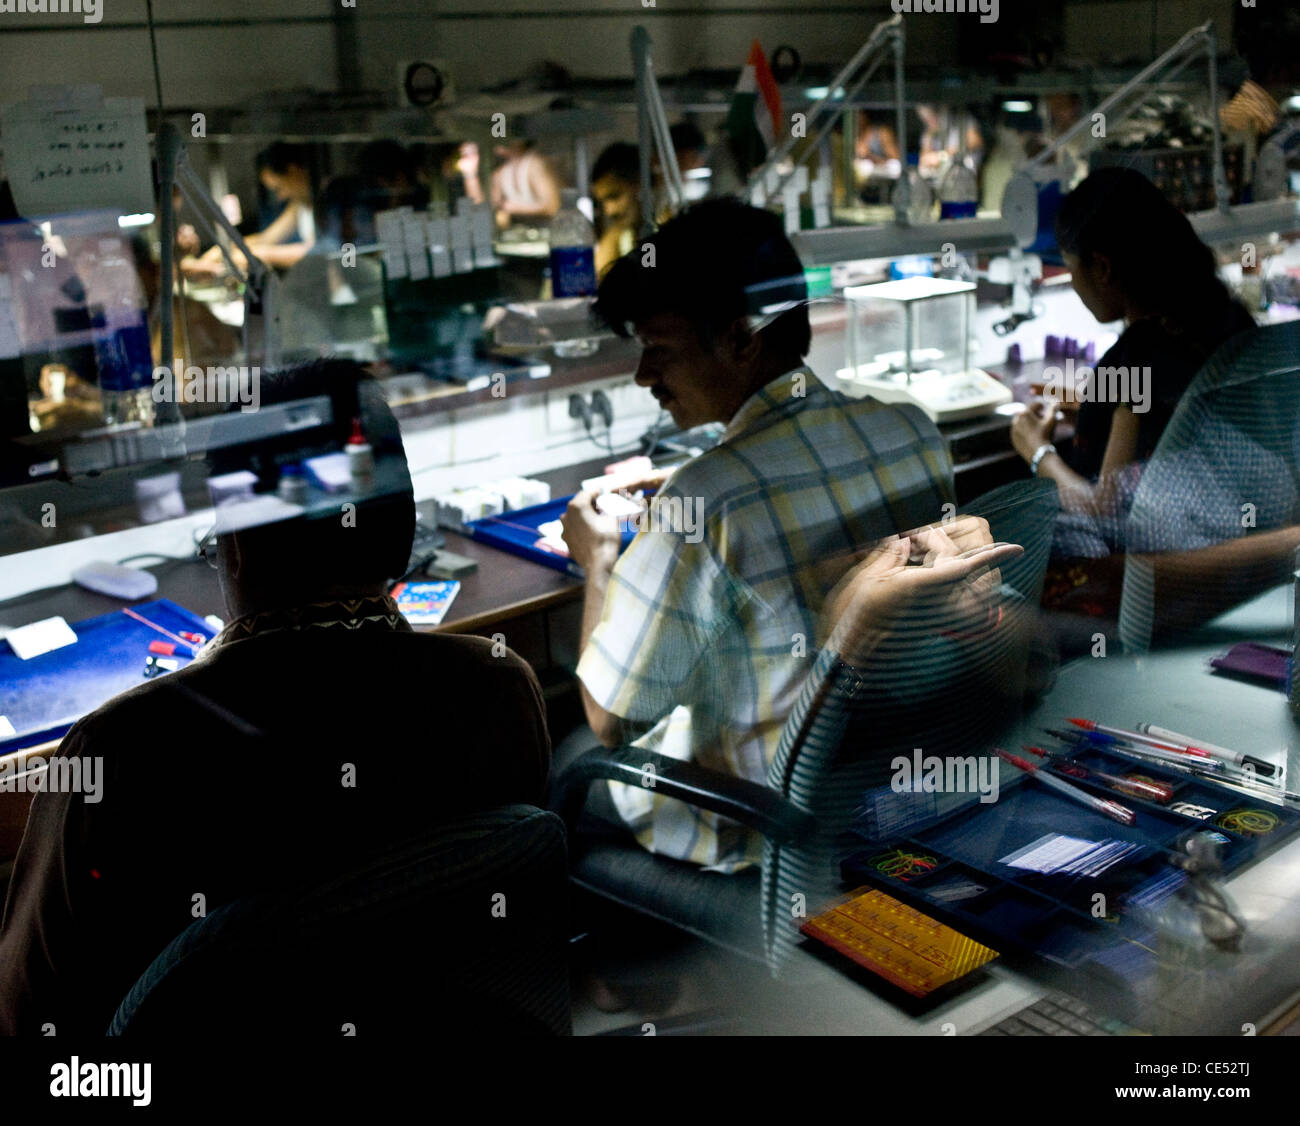 Supervisors inspect cut and polished diamonds a cutter/polisher is reflected in the glass. Stock Photo